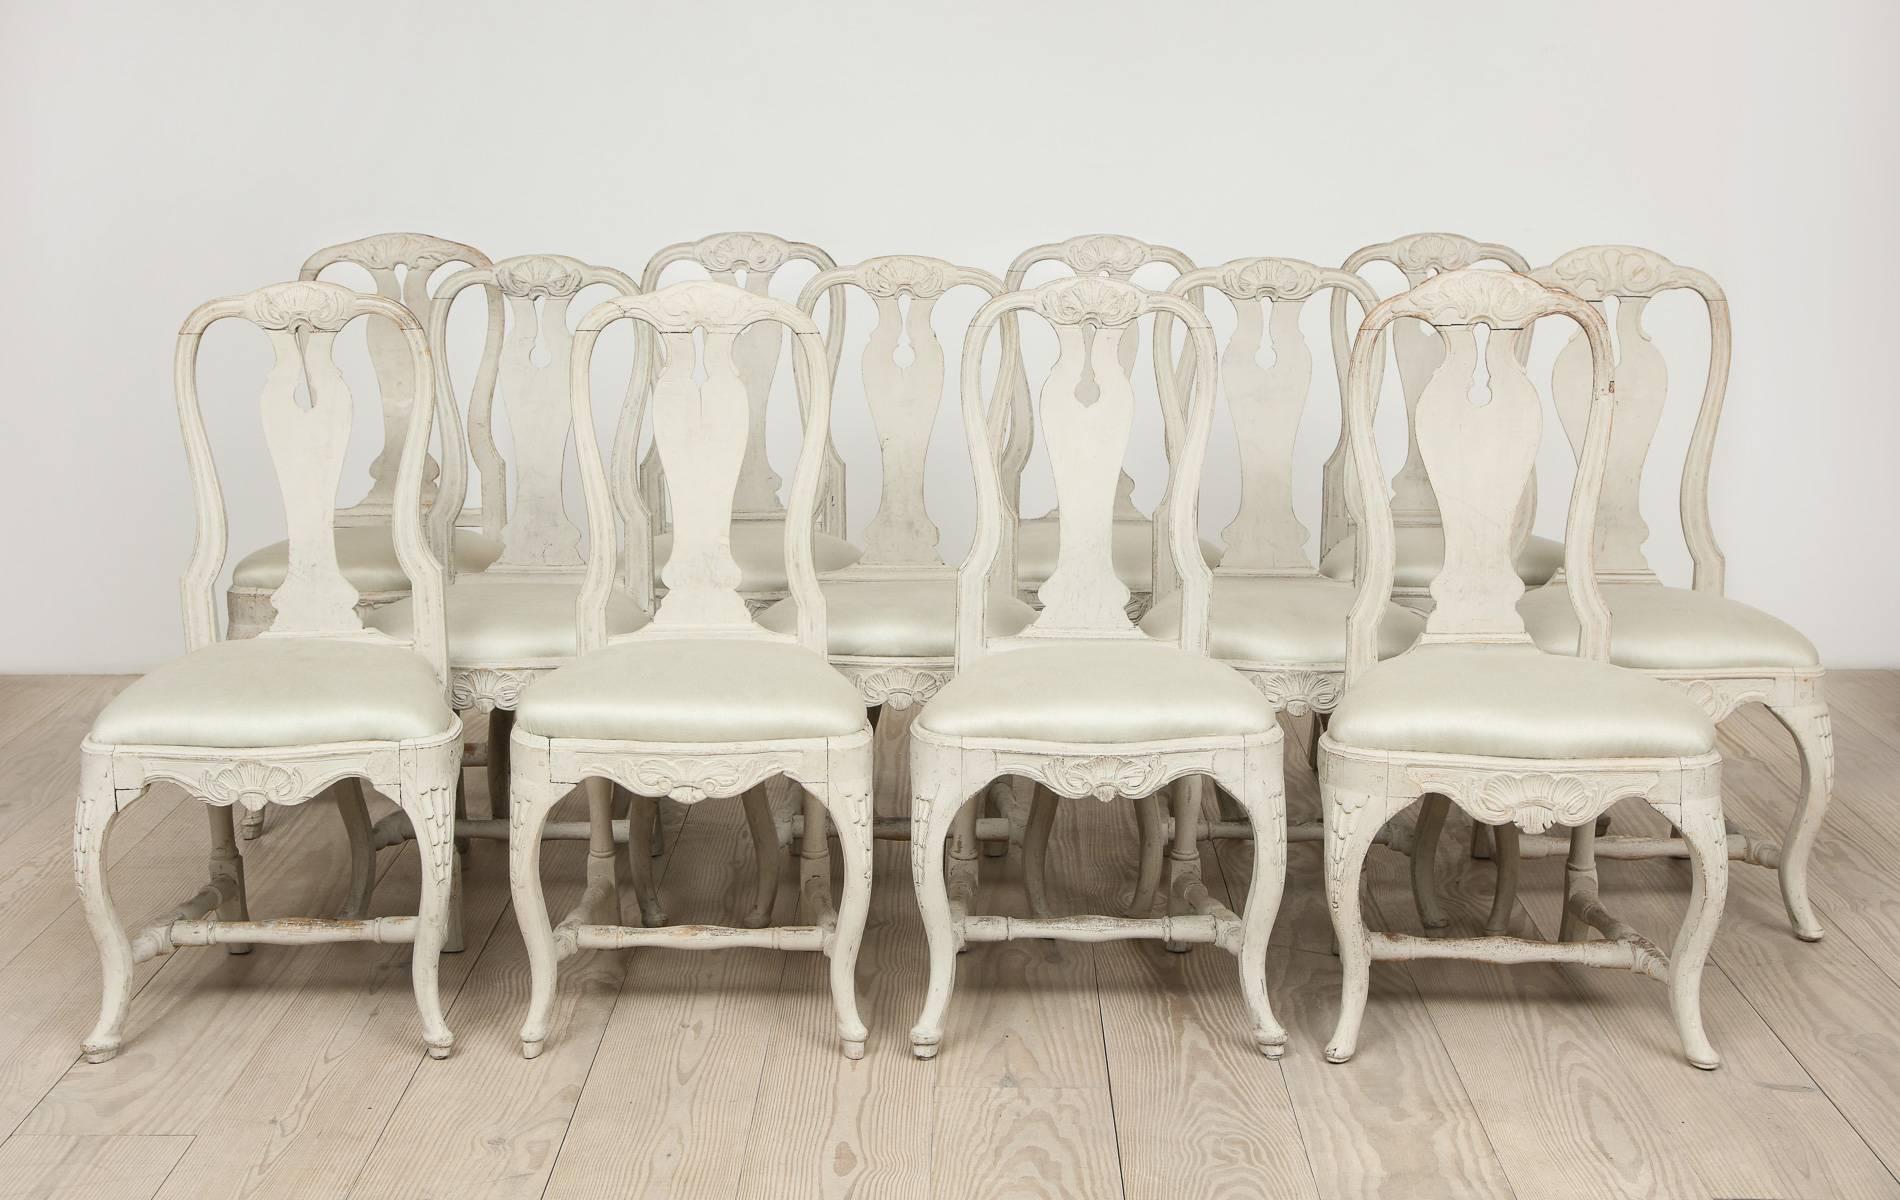 Swedish Rococo dining chairs, set of 12, circa 1765, Origin: Stockholm, Sweden

Measures: Seat height 19-3/4 inches

Cabriole legs with wide knee and paw feet, carved with rocaille, leaves, shells. Back splat with an open key hole. Seats